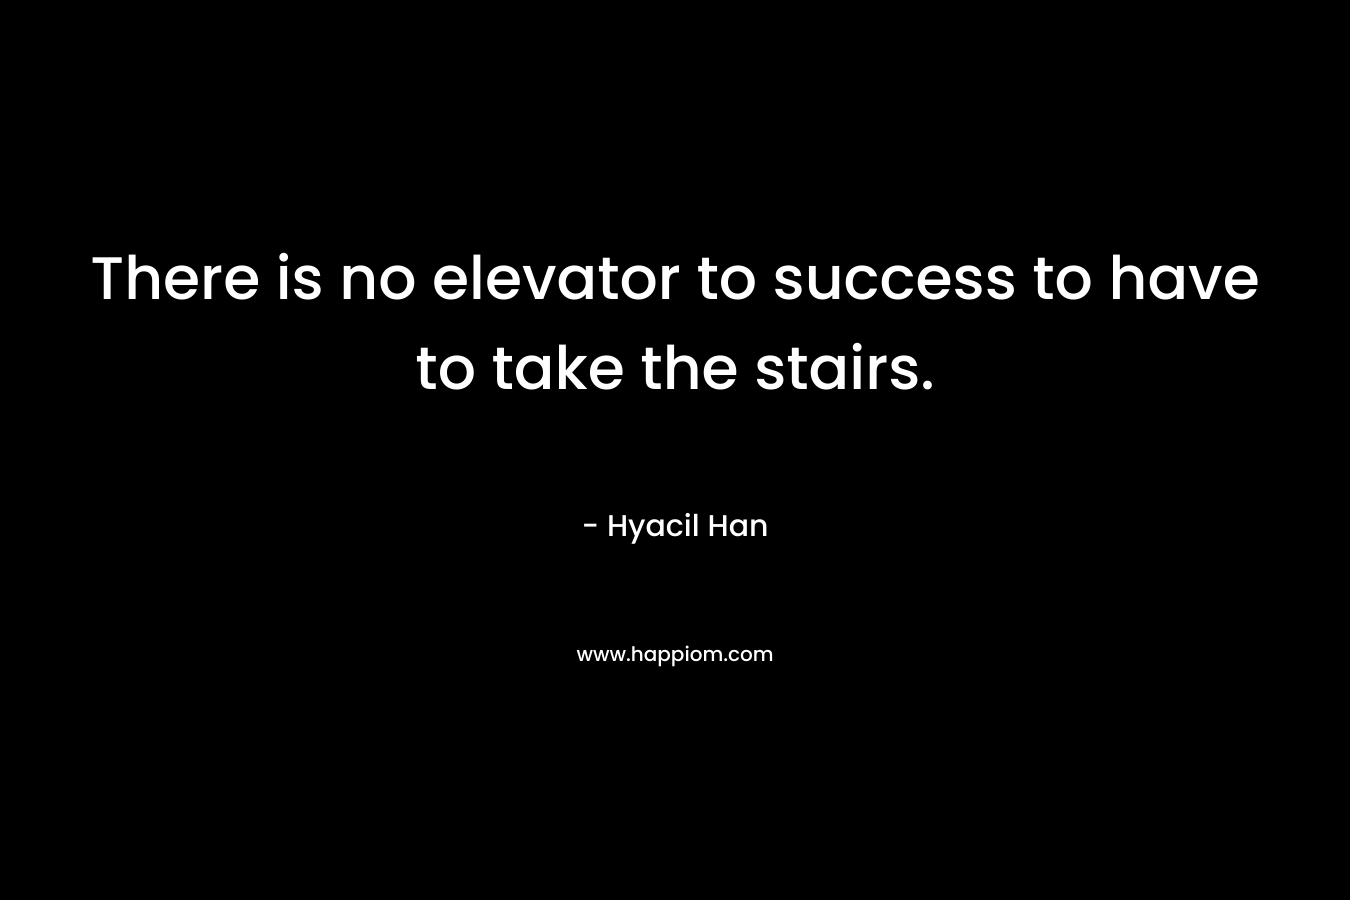 There is no elevator to success to have to take the stairs. – Hyacil Han